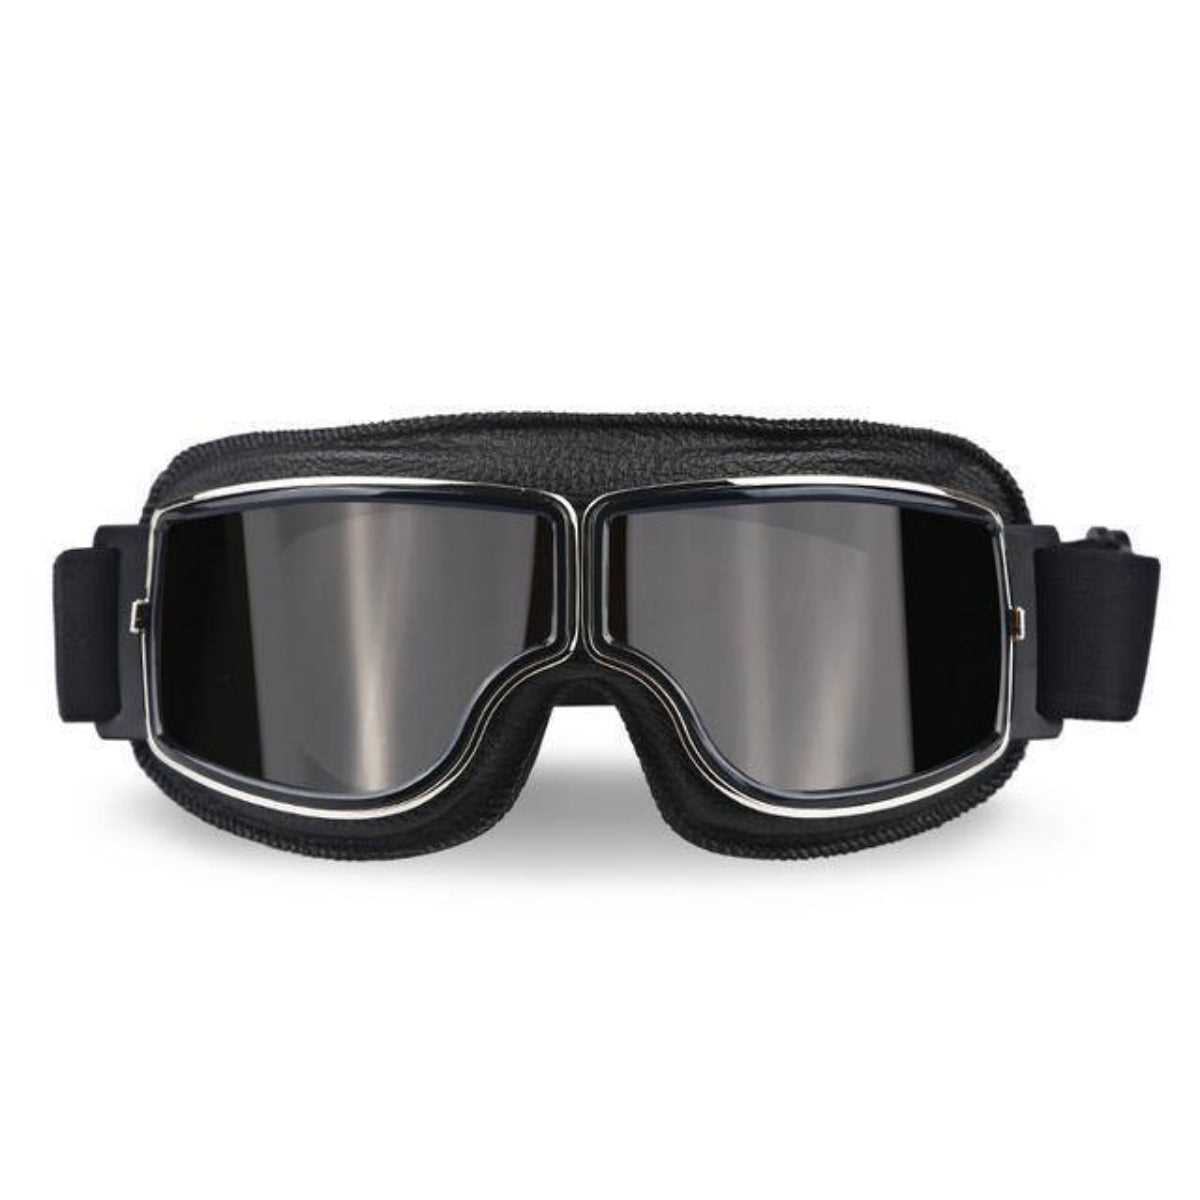 Vintage Motorcycle Goggles Timeless Style and Unmatched Protection